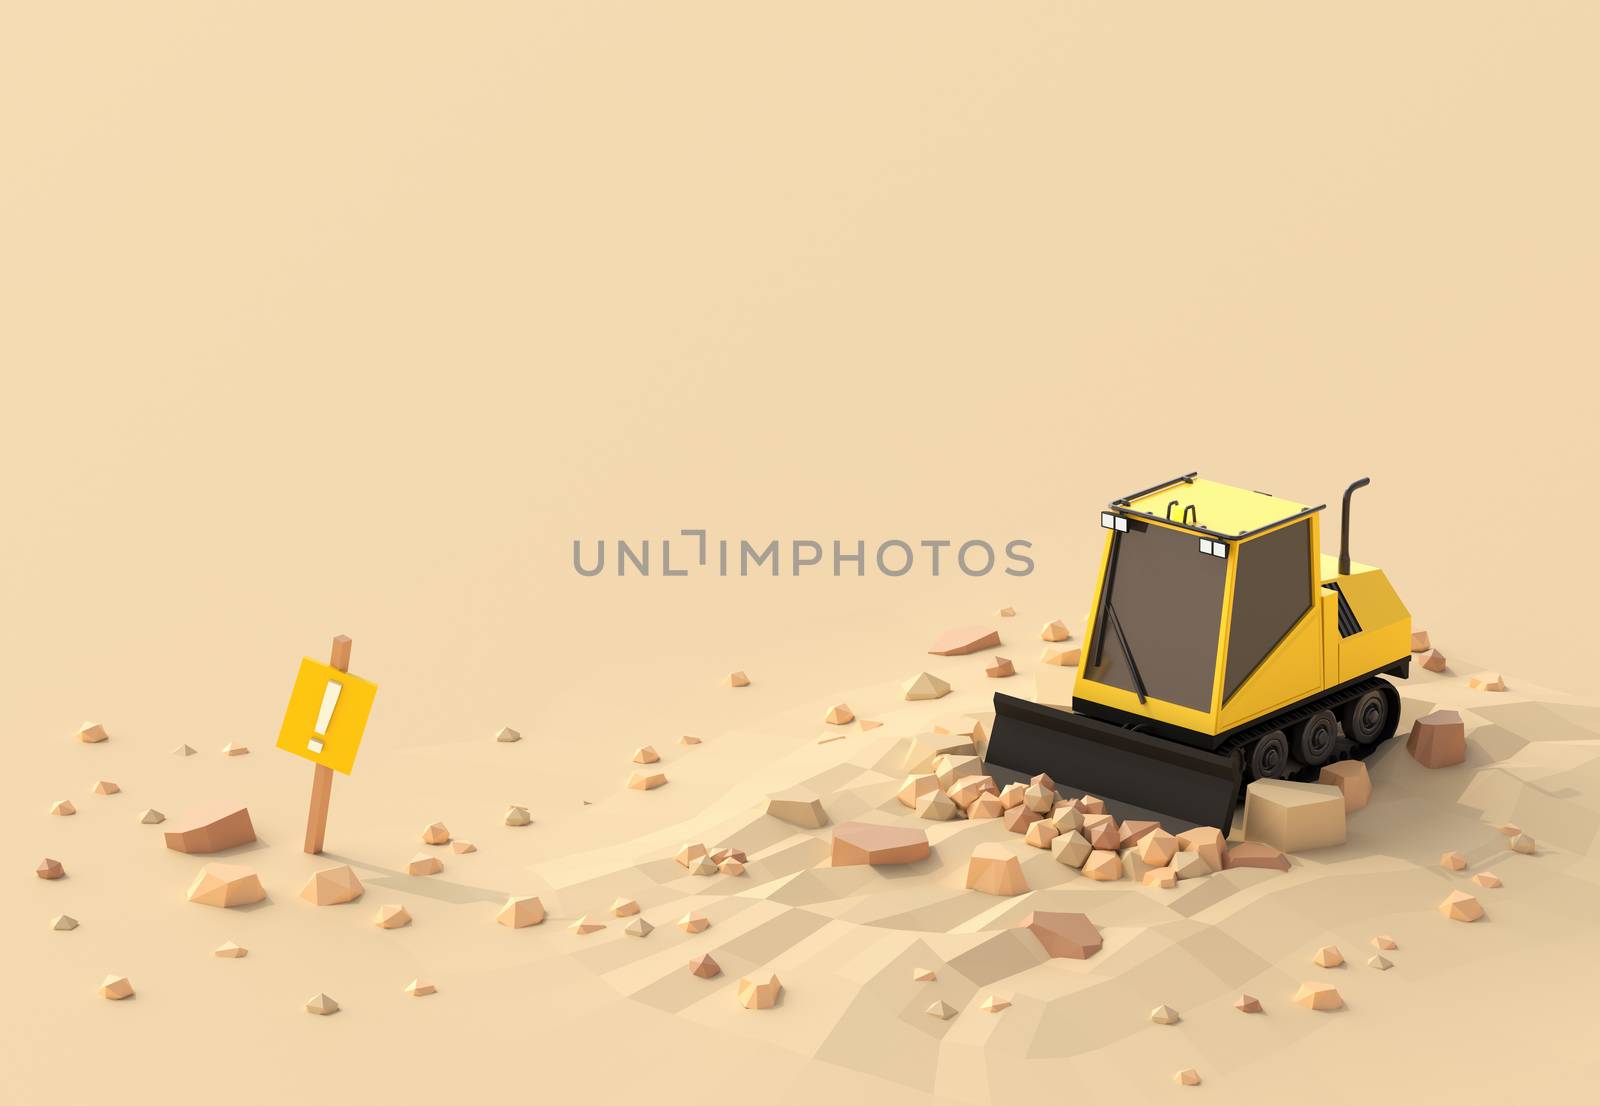 under construction design 3D illustrator graphic. yellow tractor truck isometric idea service on the construction dirt ground. concept of maintenance page web site network app. copy space background.